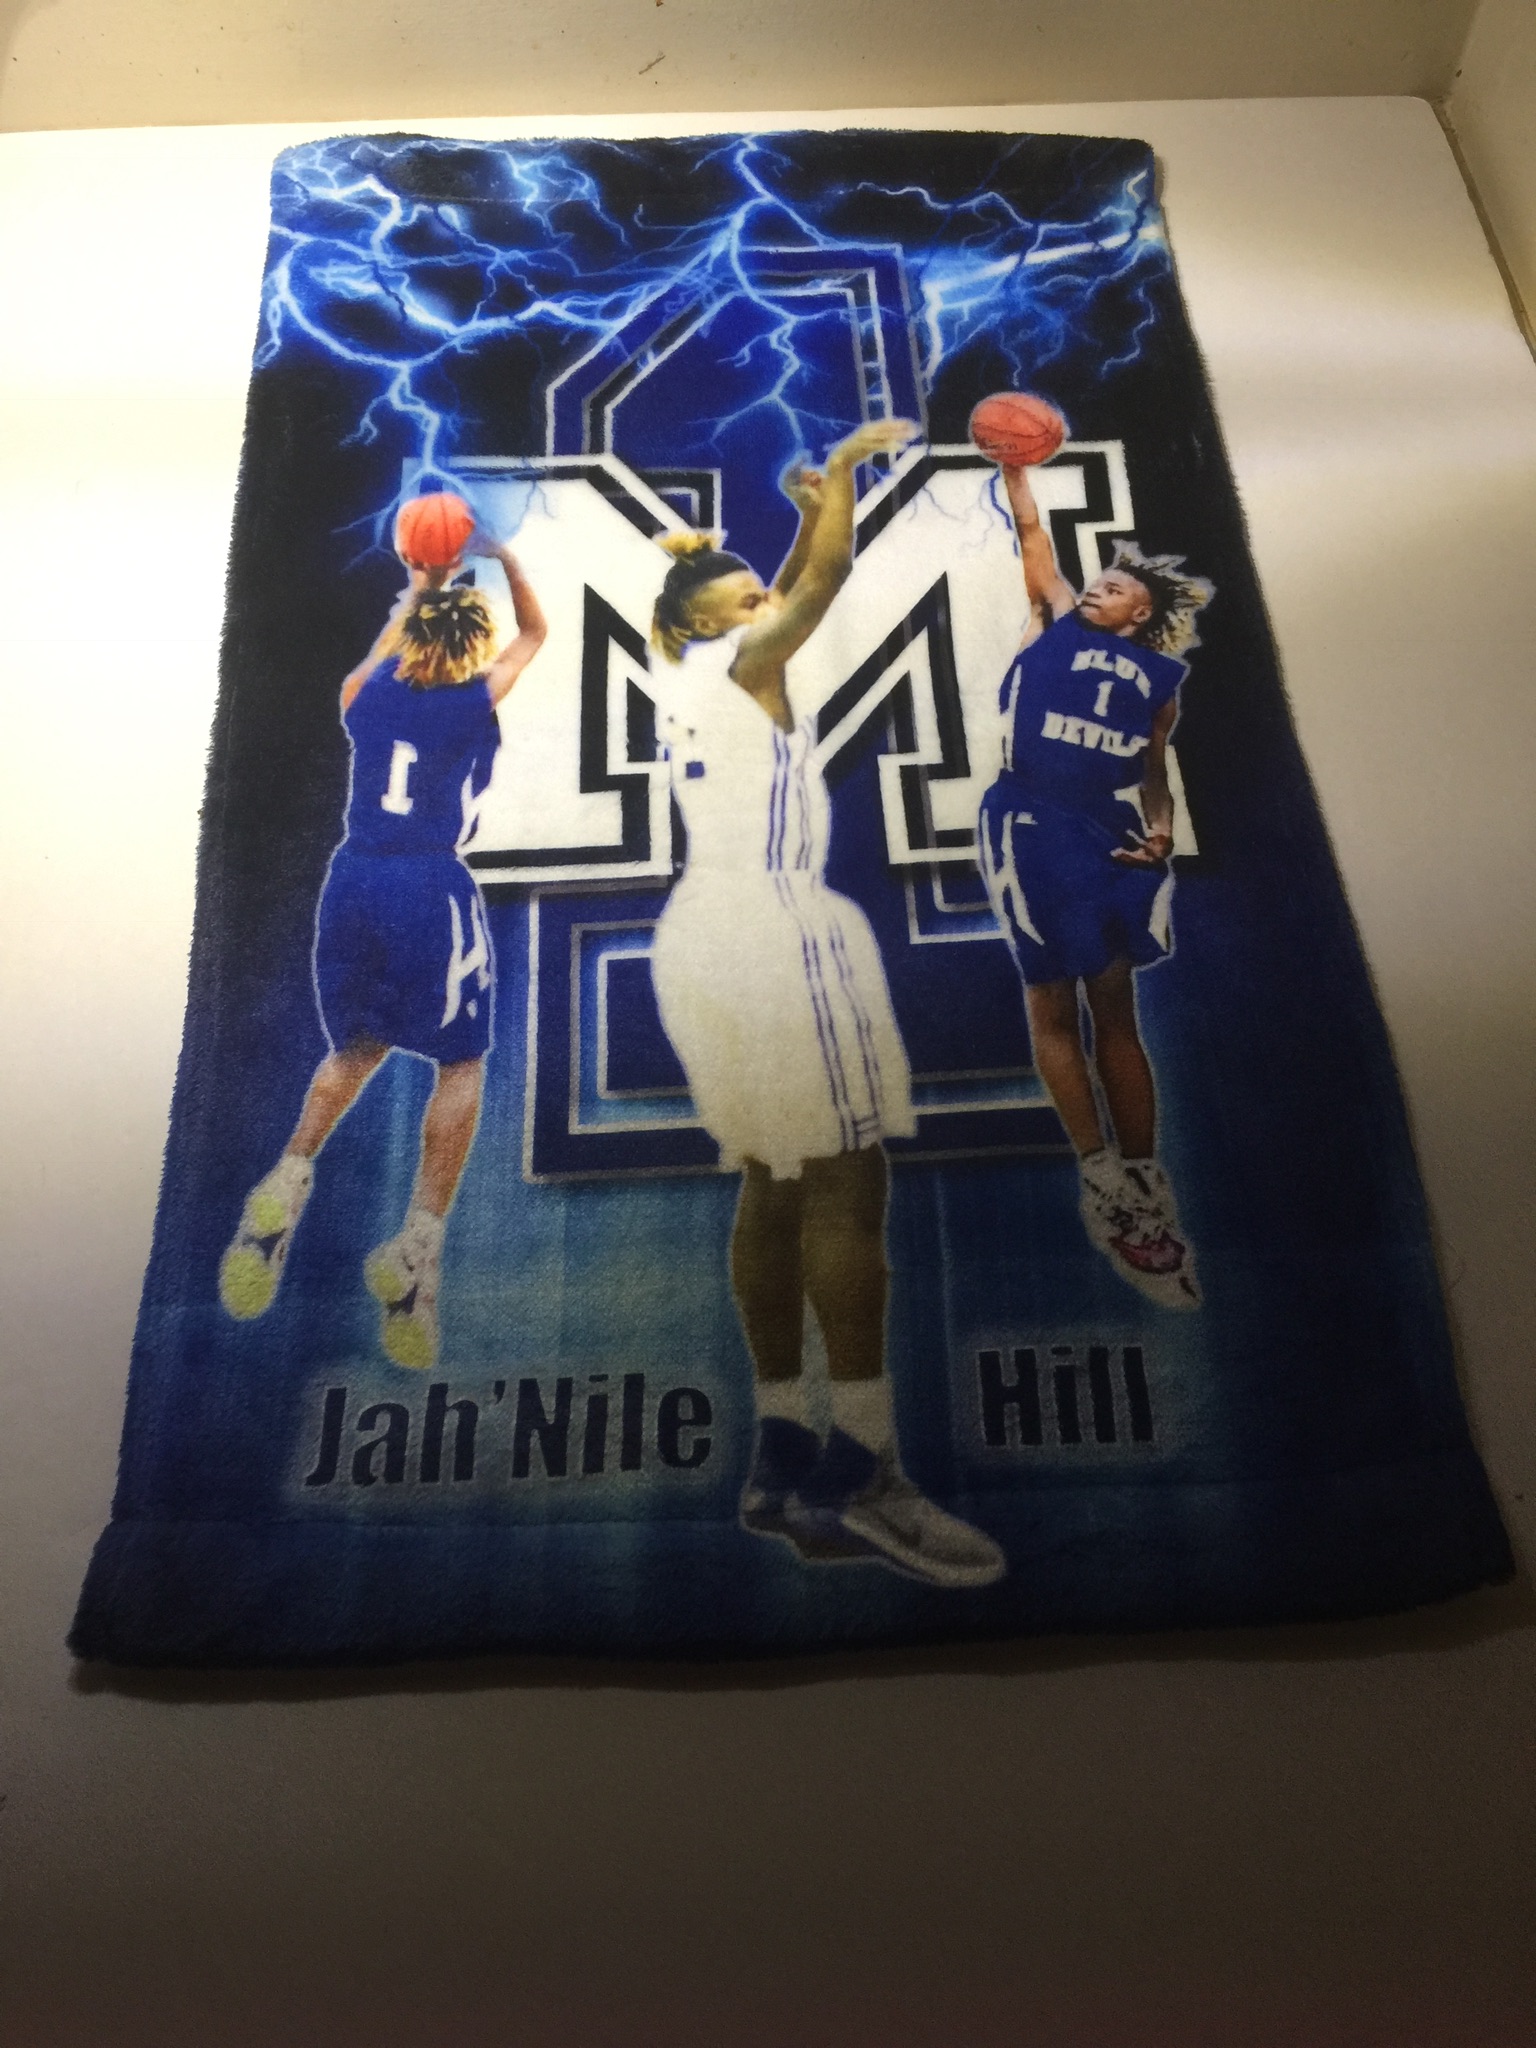  made with sublimation printing